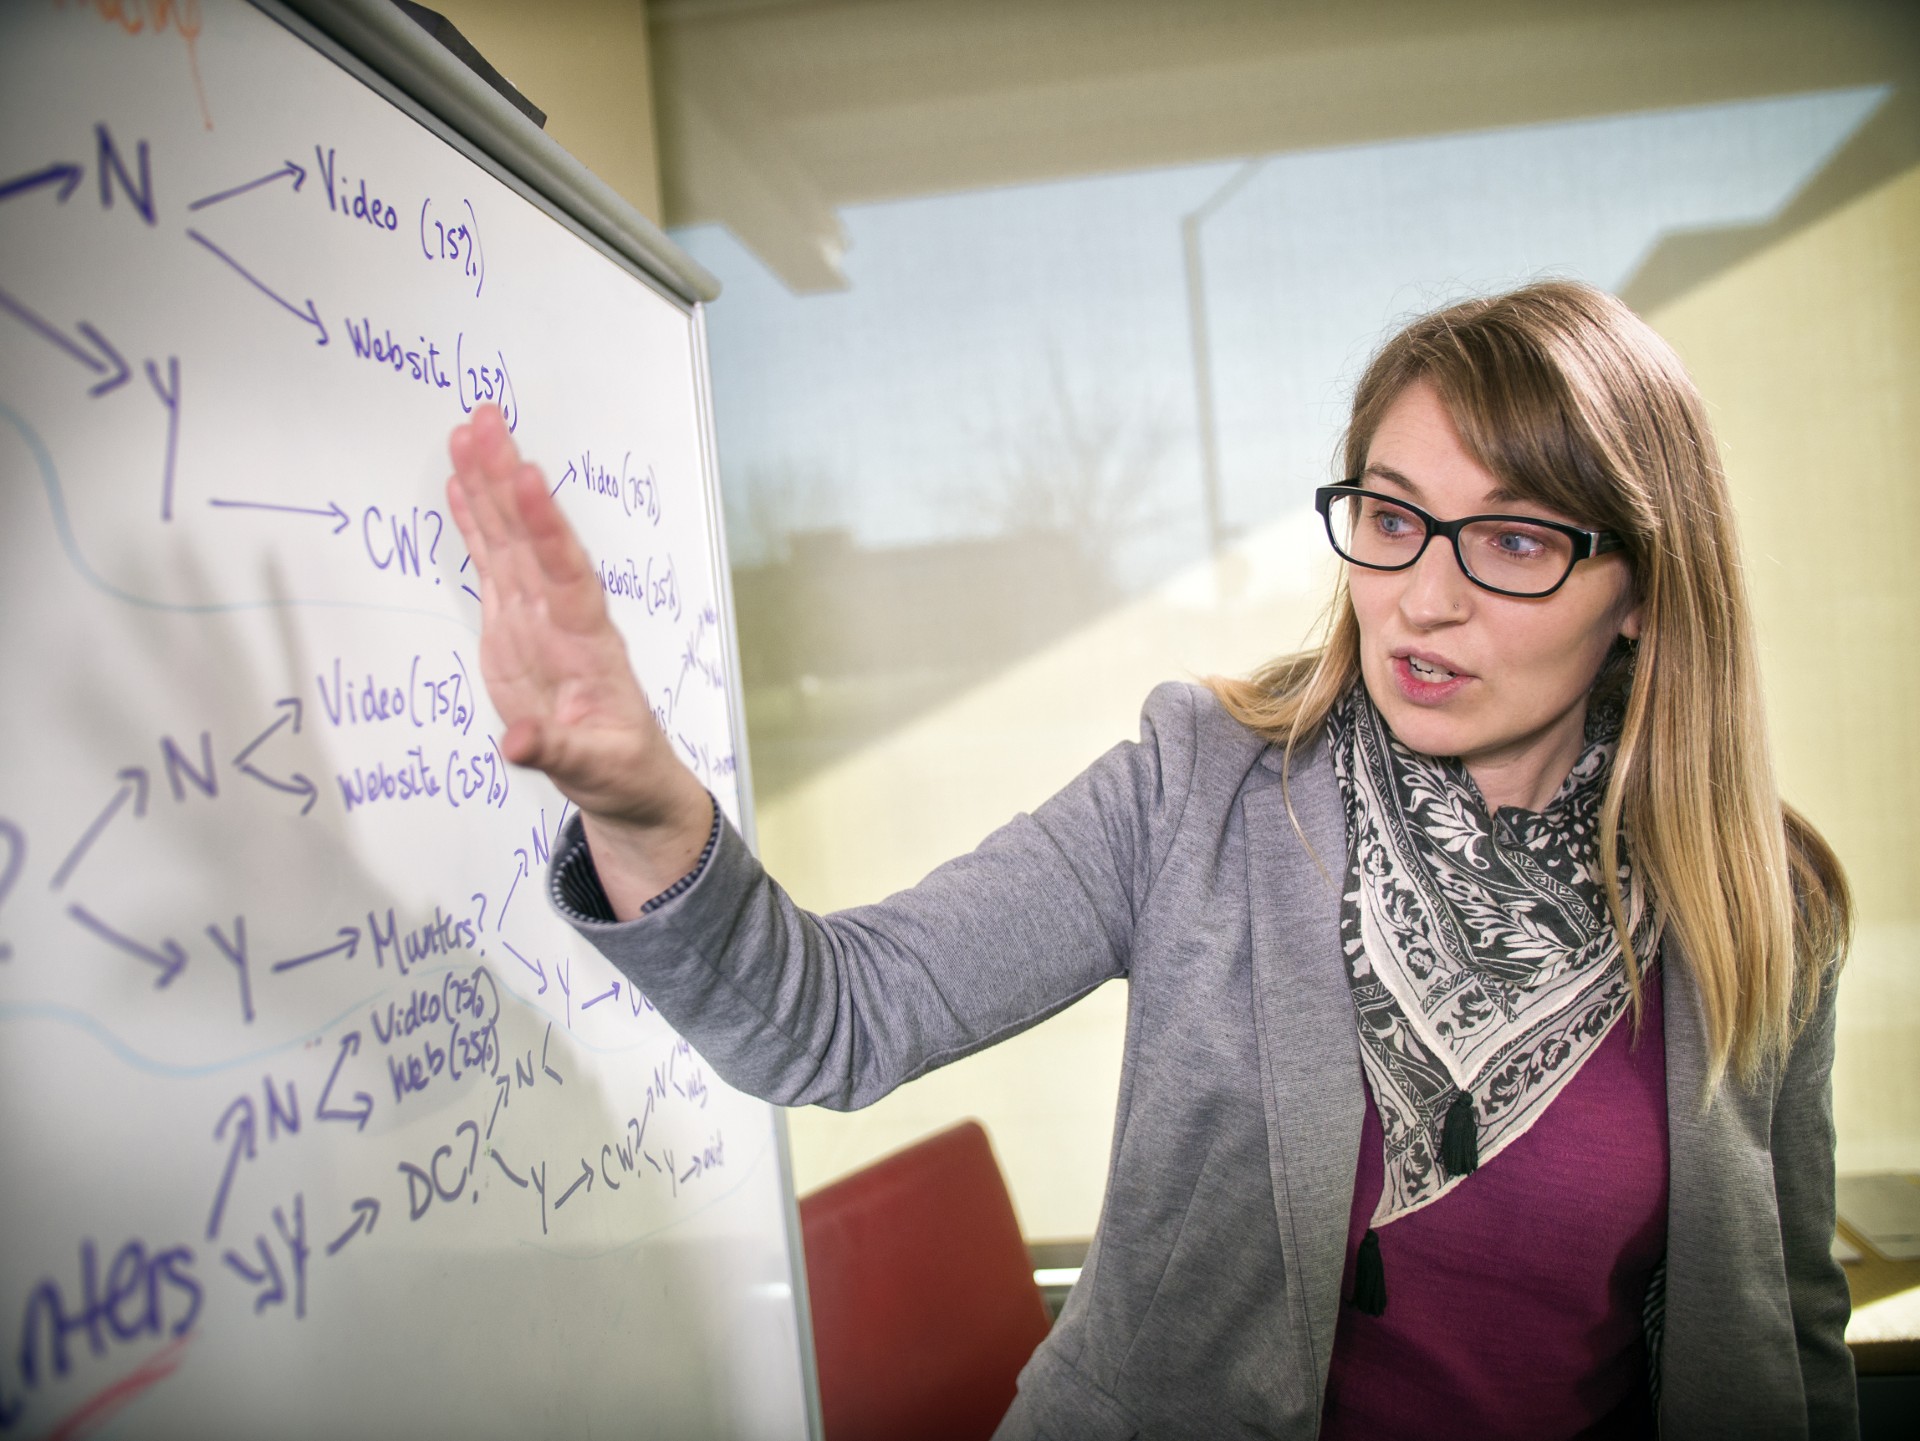 A blonde woman in a gray jacket reads a whiteboard